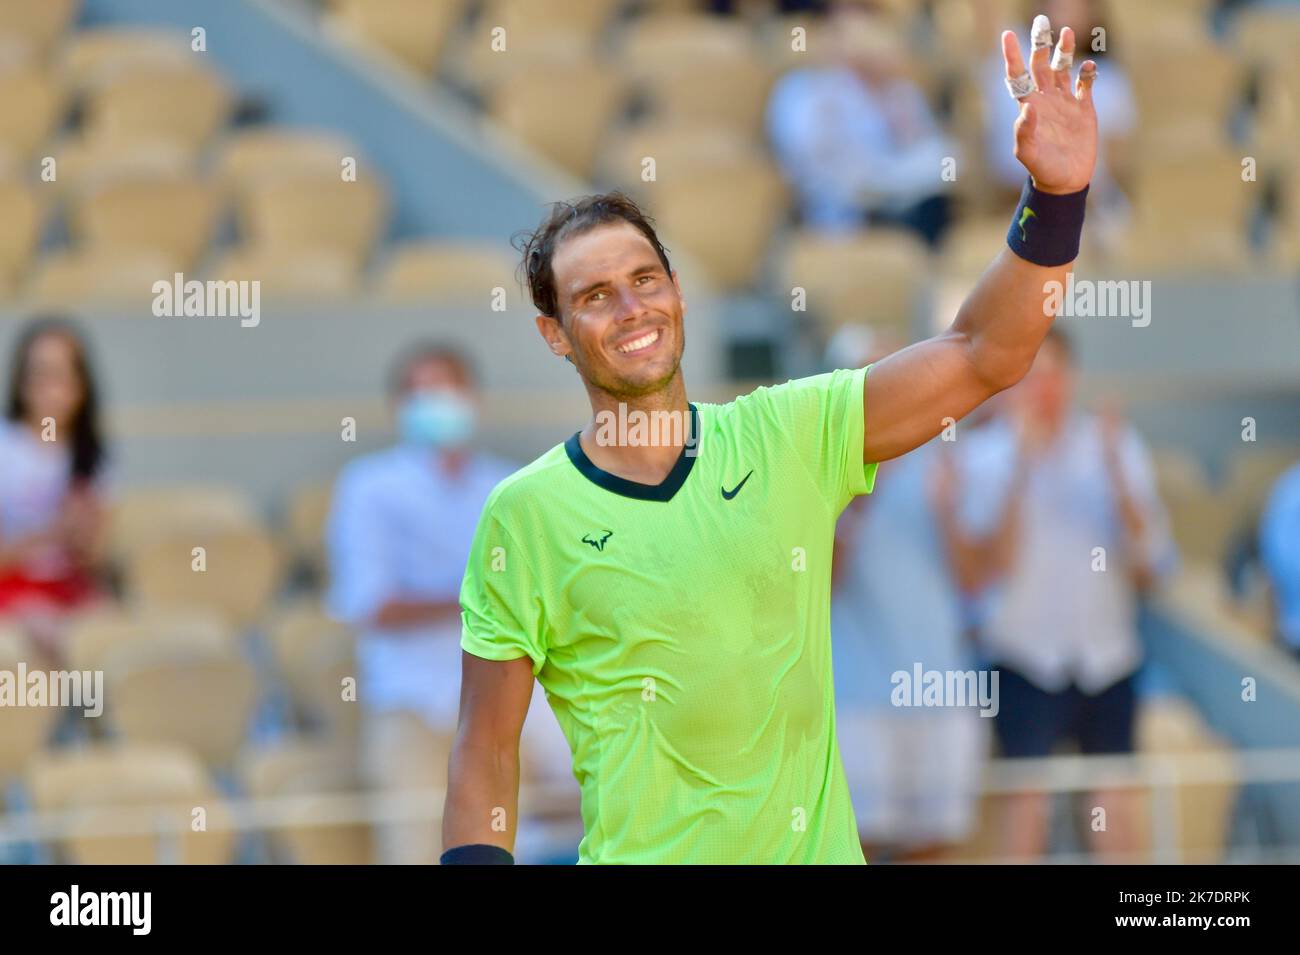 ©FRANCK CASTEL/MAXPPP - French Open Tennis. Roland-Garros 2021. Rafael Nadal of Spain during day 3 of Roland-Garros 2021 French Open, a Grand Slam tennis tournament at Roland Garros stadium on June 1, 2021 in Paris, France. Stock Photo